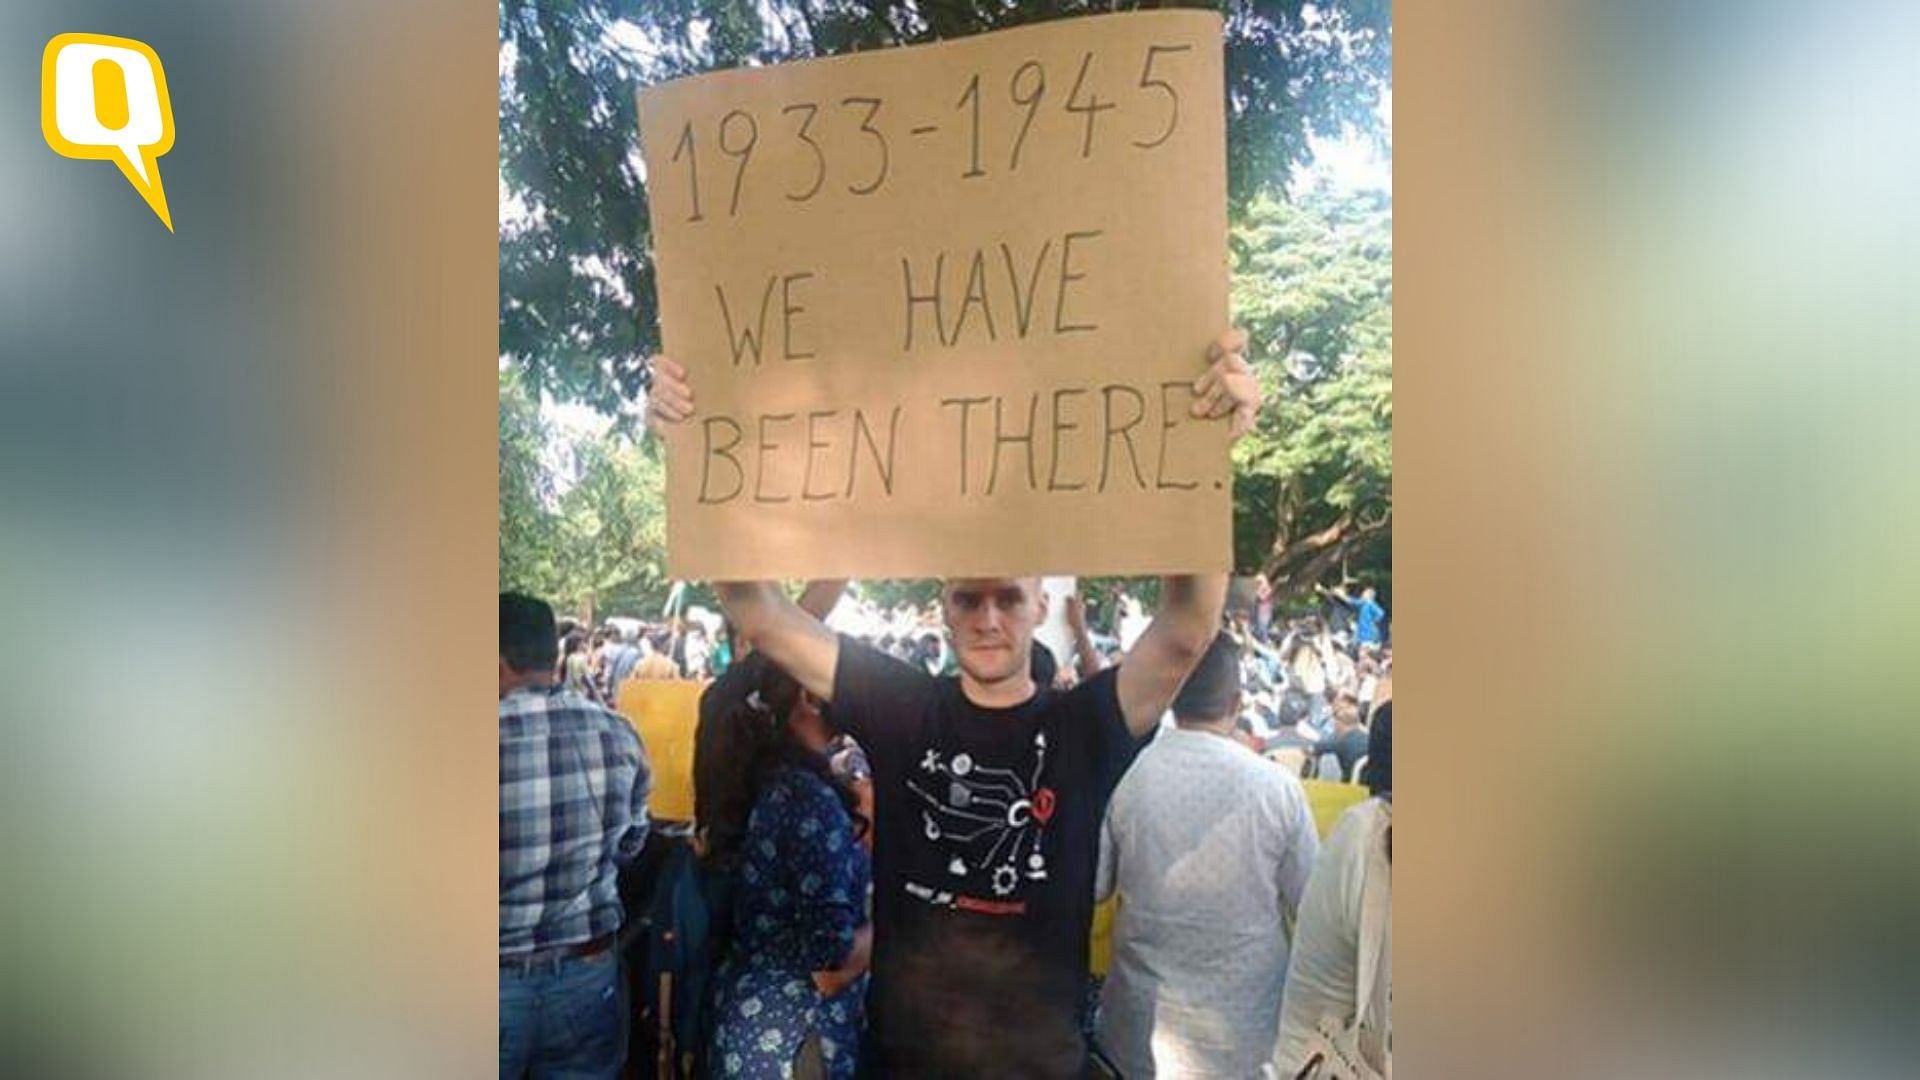 Jackbok Lindenthal only had a semester left at IIT Madras when the immigration department asked him to leave the country, due to his participation in anti-CAA protests.&nbsp;